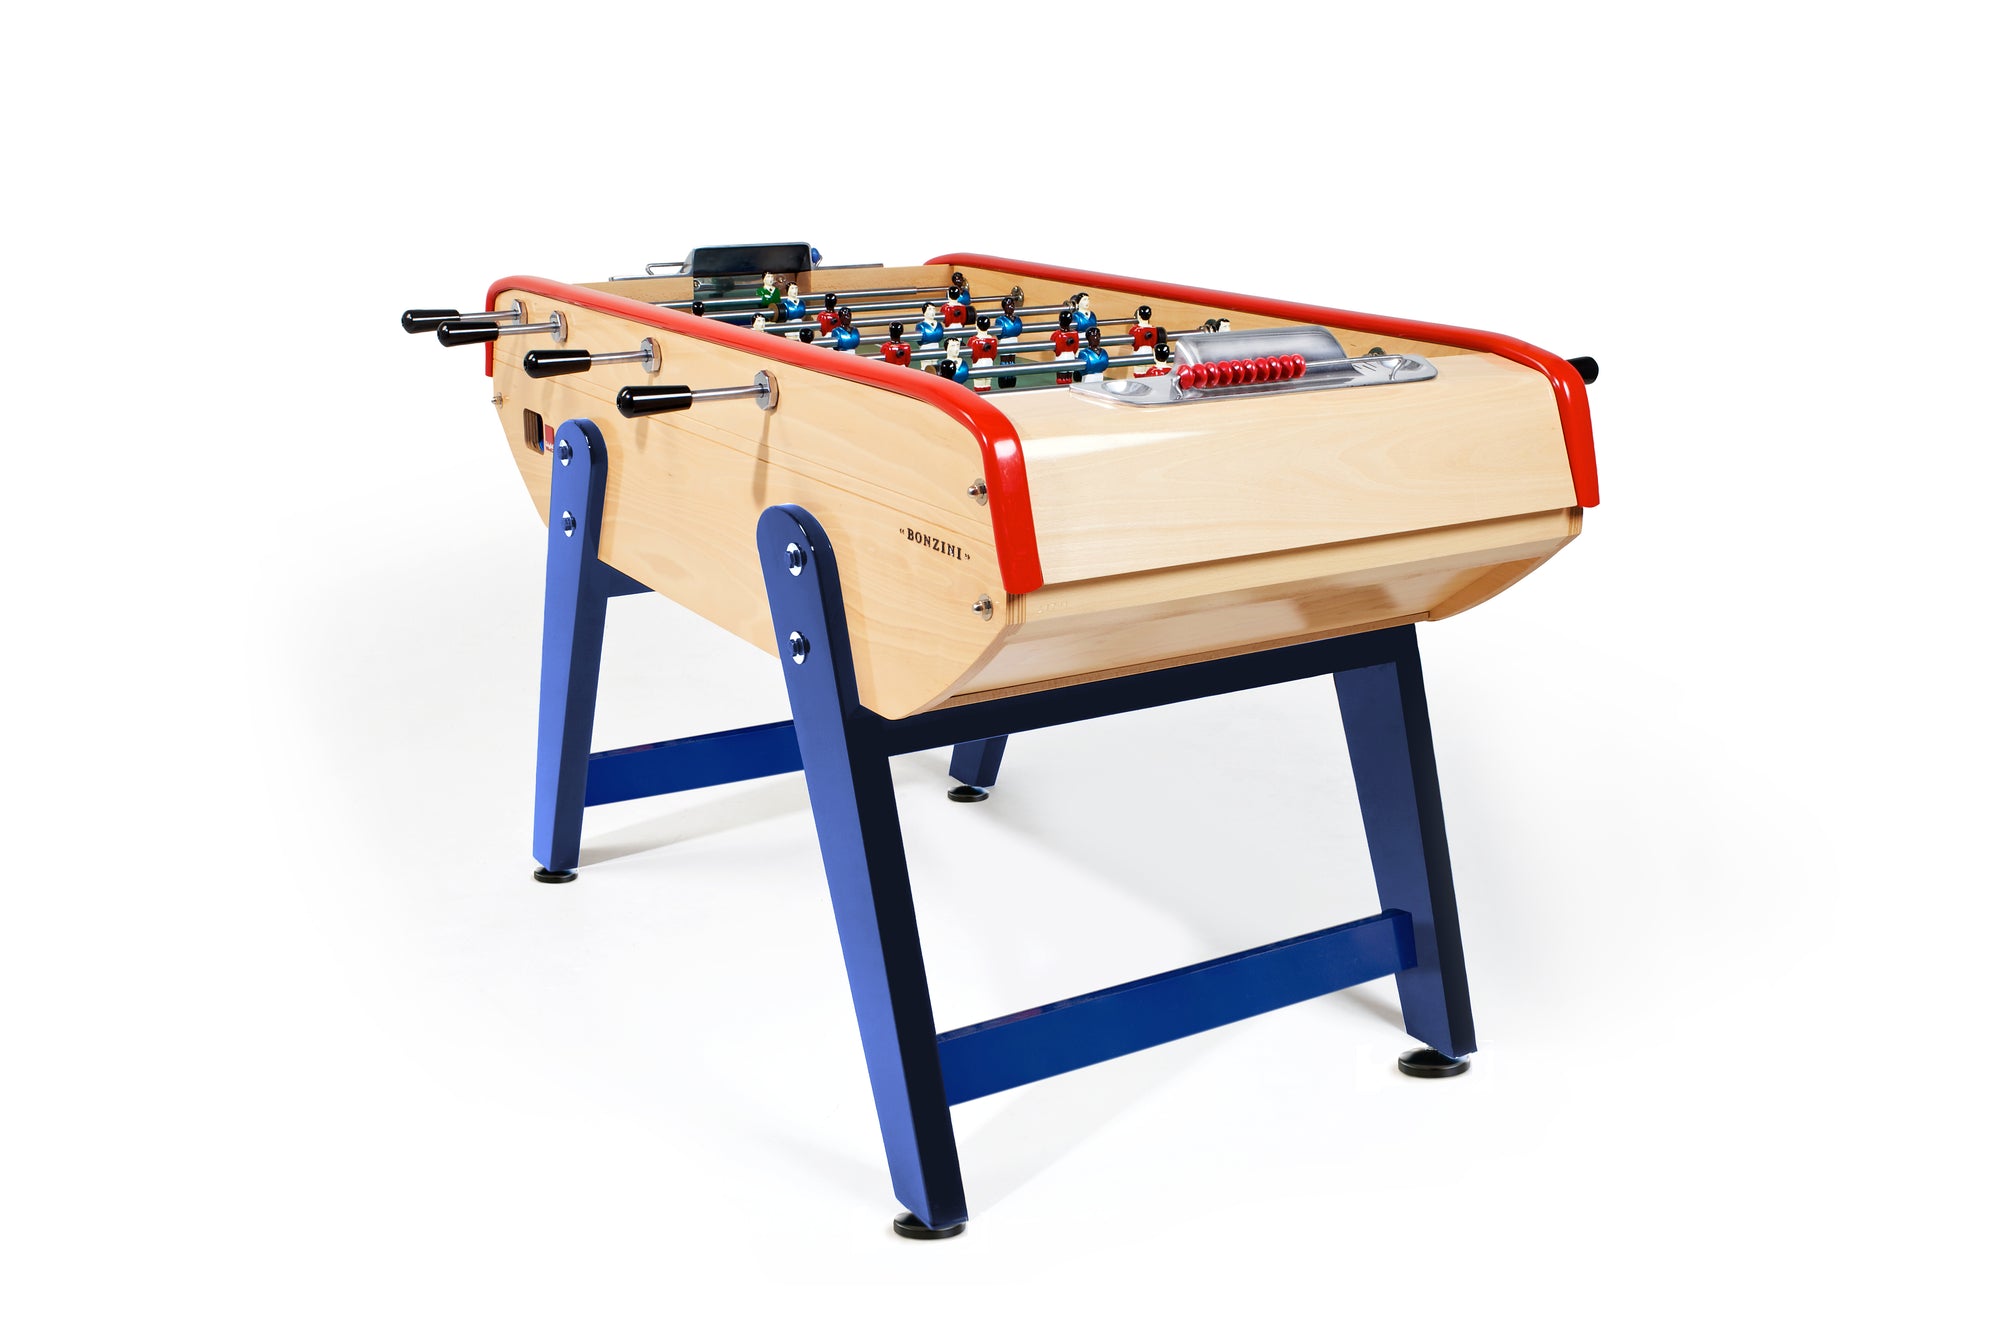 Official ITSF Bonzini 'Babyfoot' B90 (Competition table)